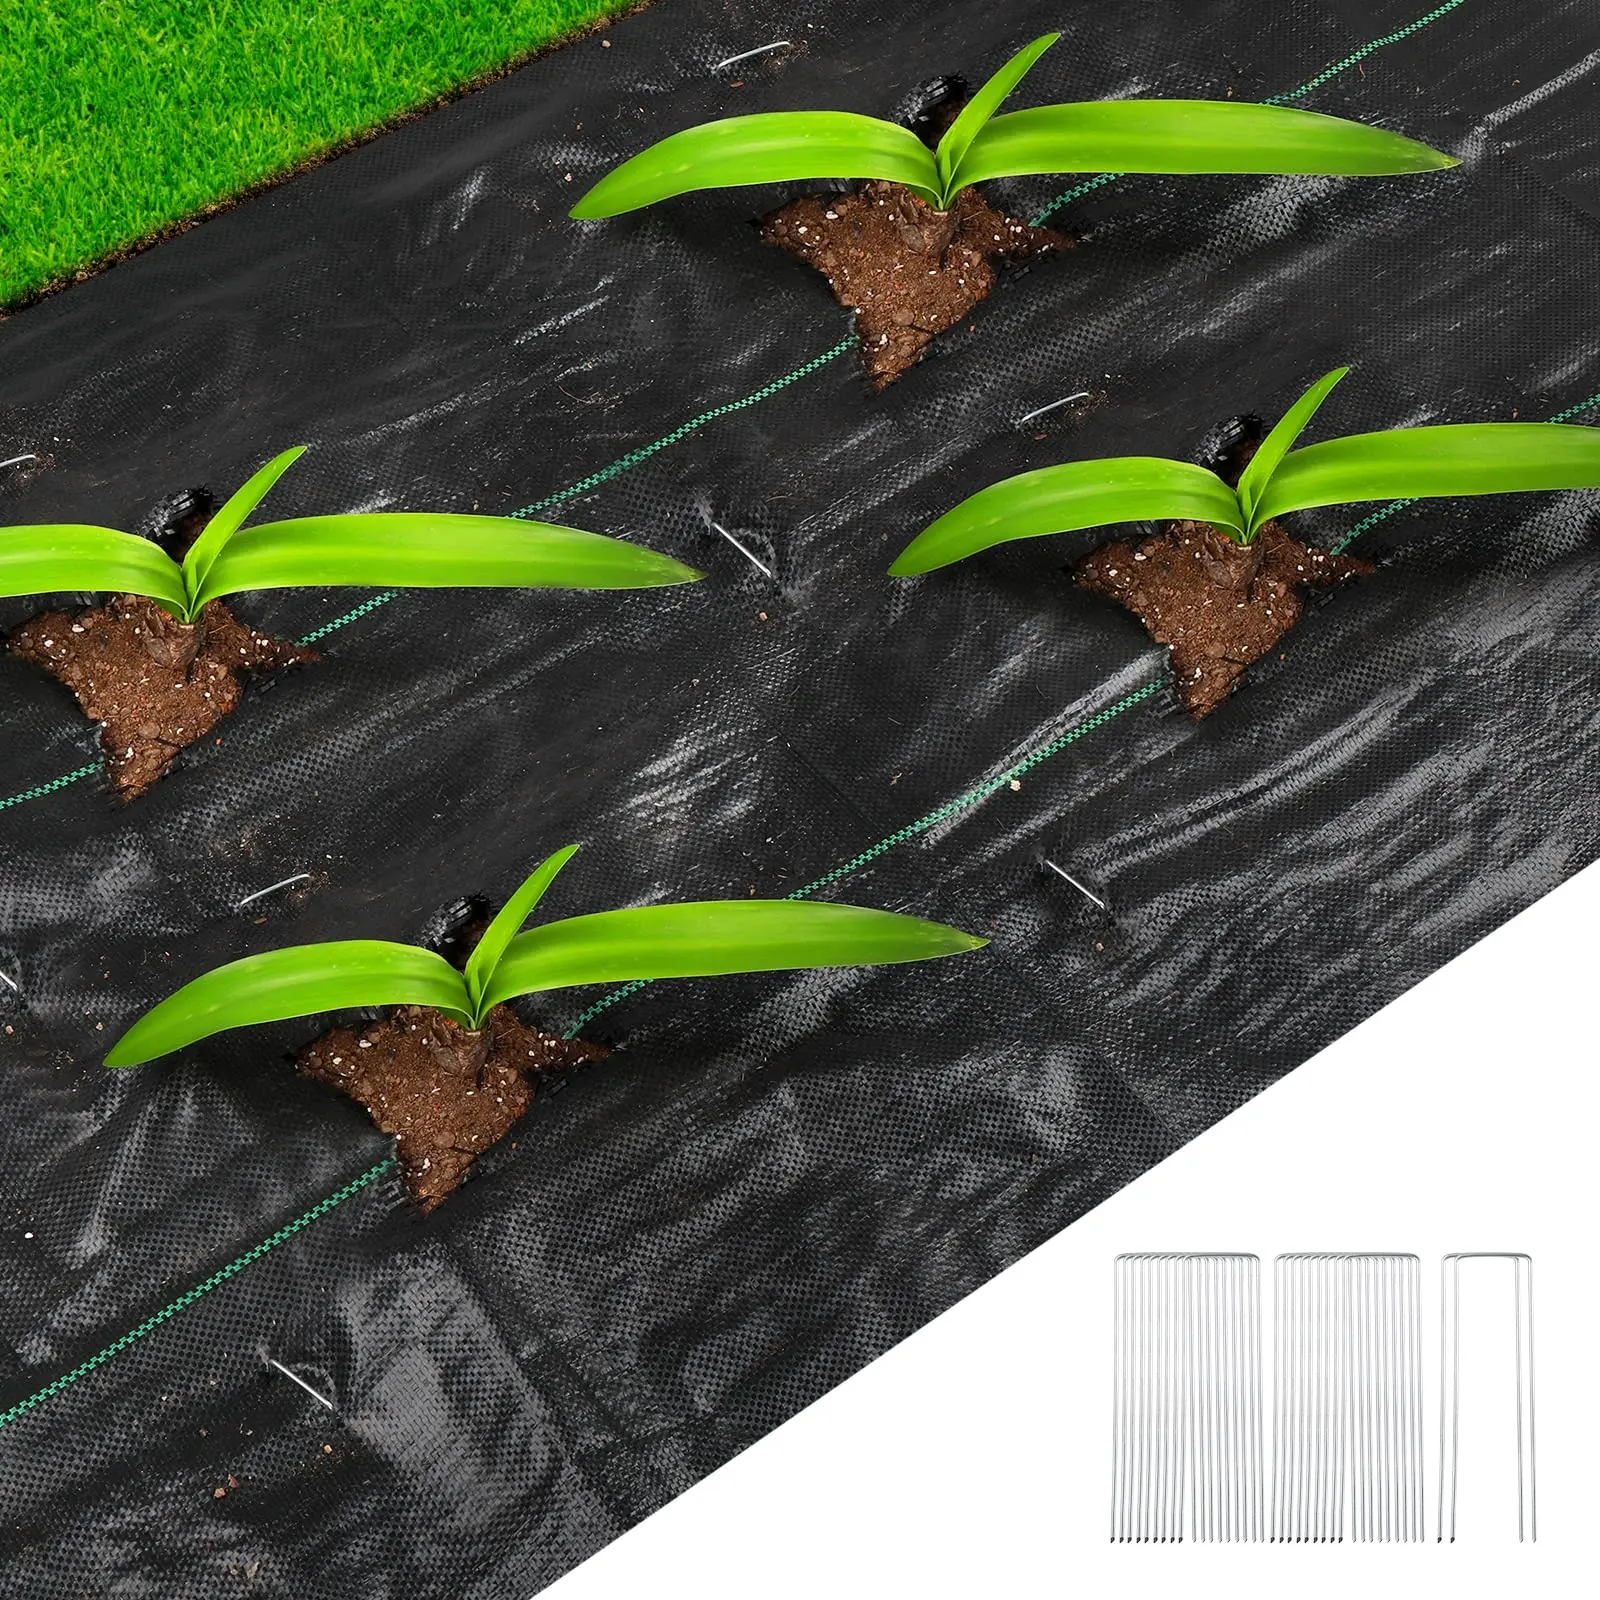 Ground Cover Control Greenhouse Weeding Seed Sheet Antigrass Barrier Black Plastic Mulch Fabric Agriculture Natural Pp Weed Mat